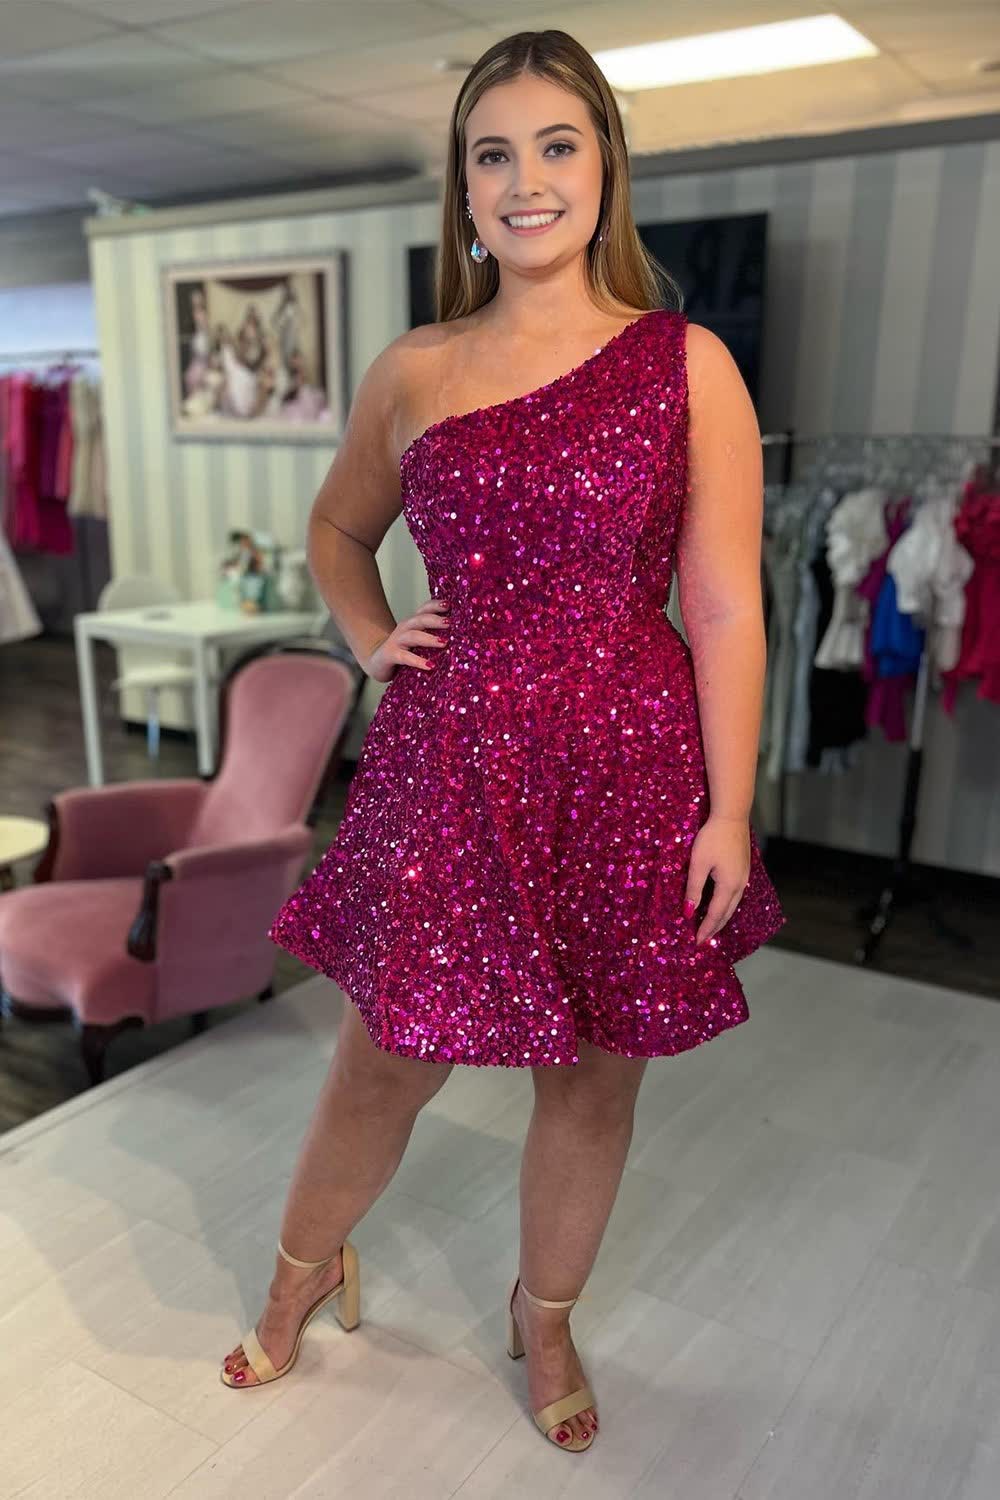 Sparkly Hot Pink One Shoulder Sequins Short Corset Homecoming Dress outfit, Sparkly Hot Pink One Shoulder Sequins Short Homecoming Dress